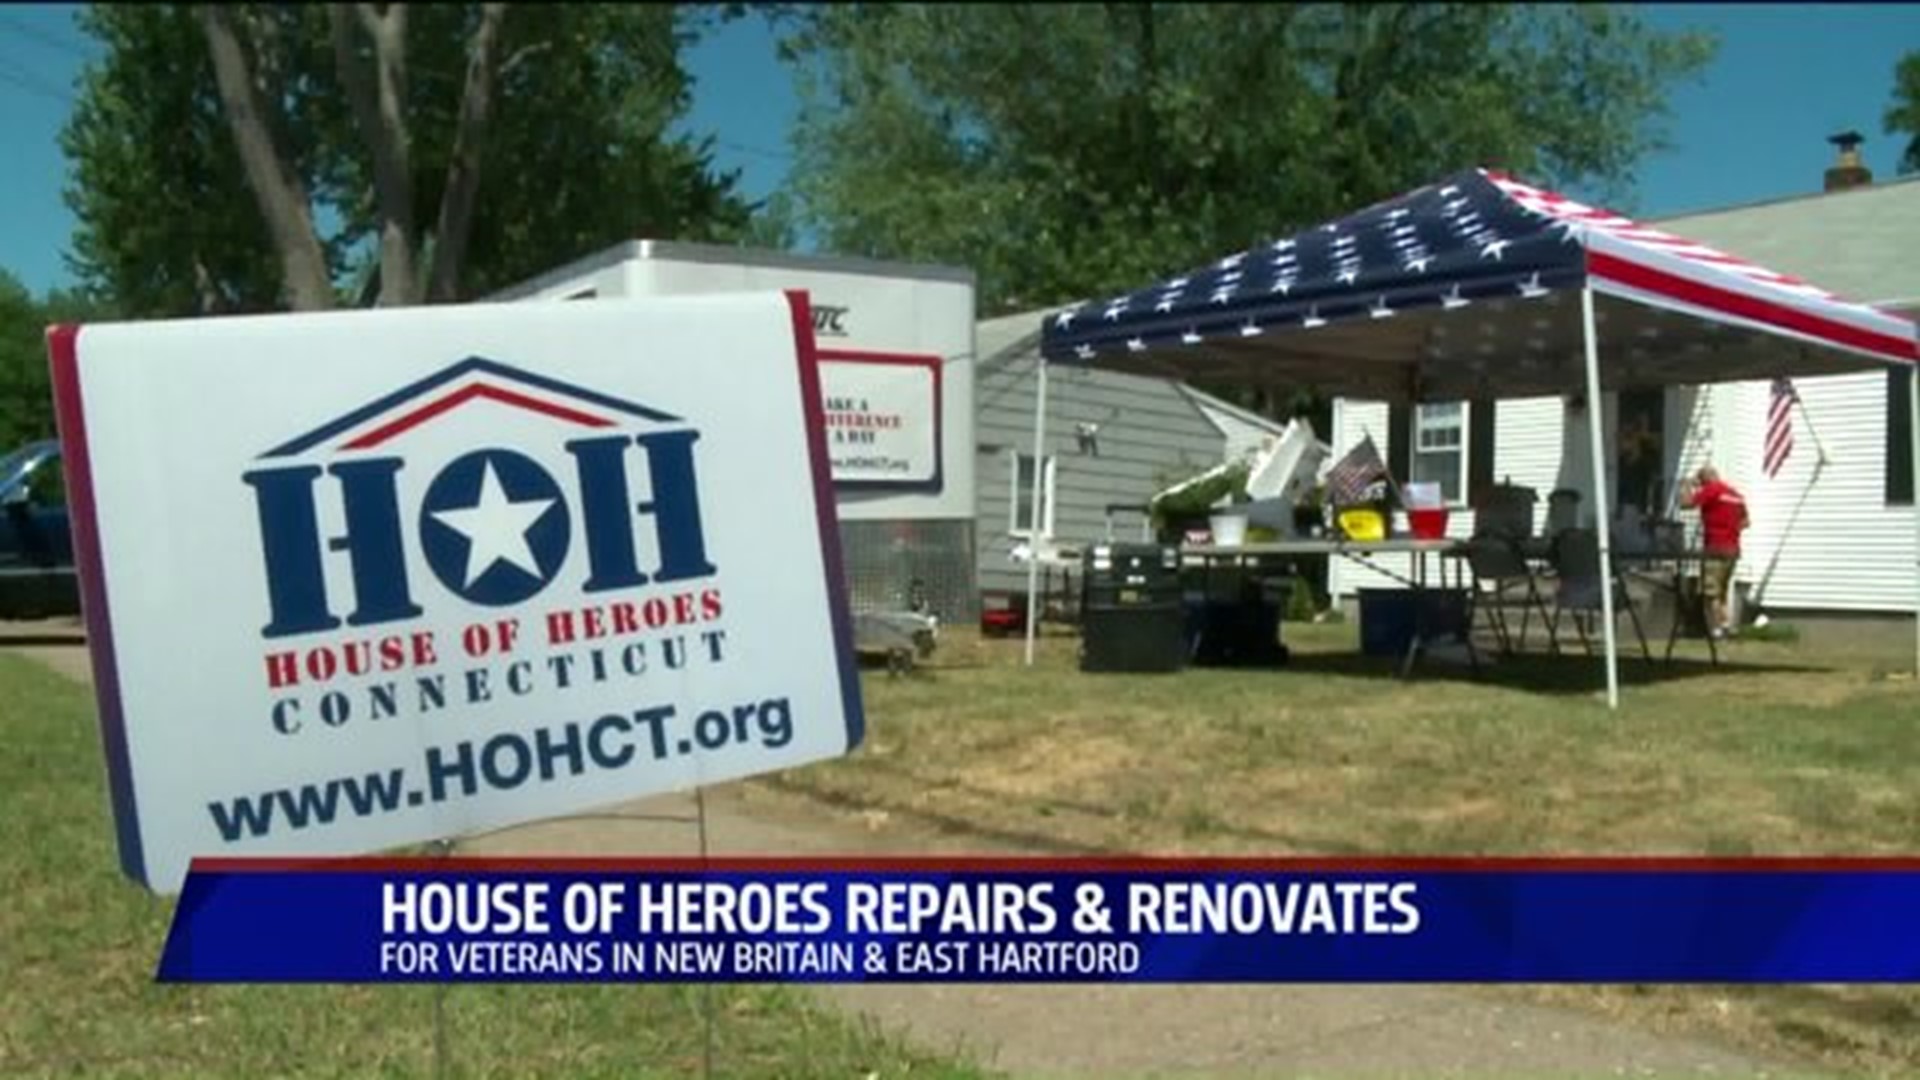 House of Heroes helps do repairs for veterans` homes